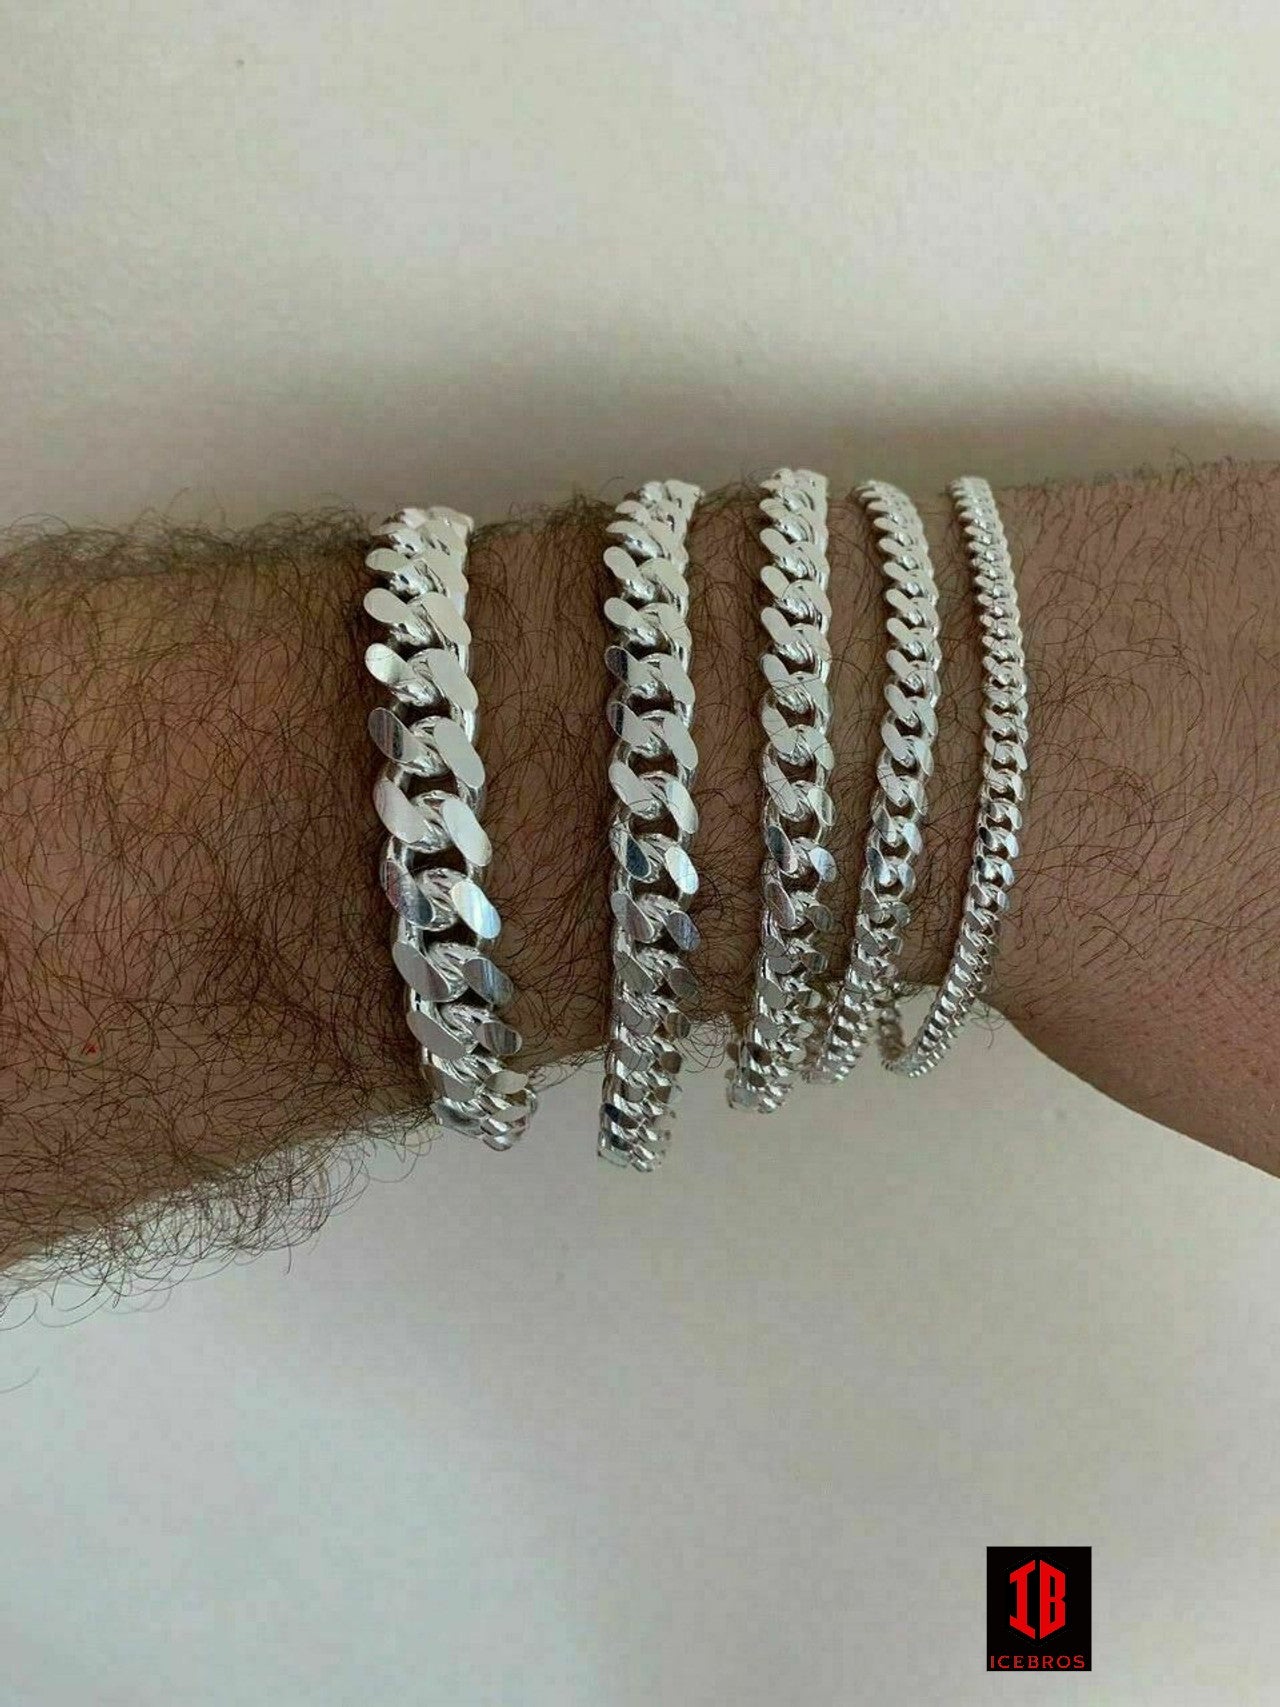 WHITE GOLD (LOBSTER CLASP) Mens Real Solid 925 Sterling Silver Miami Cuban Bracelet 5-12mm 7-9" Heavy Link